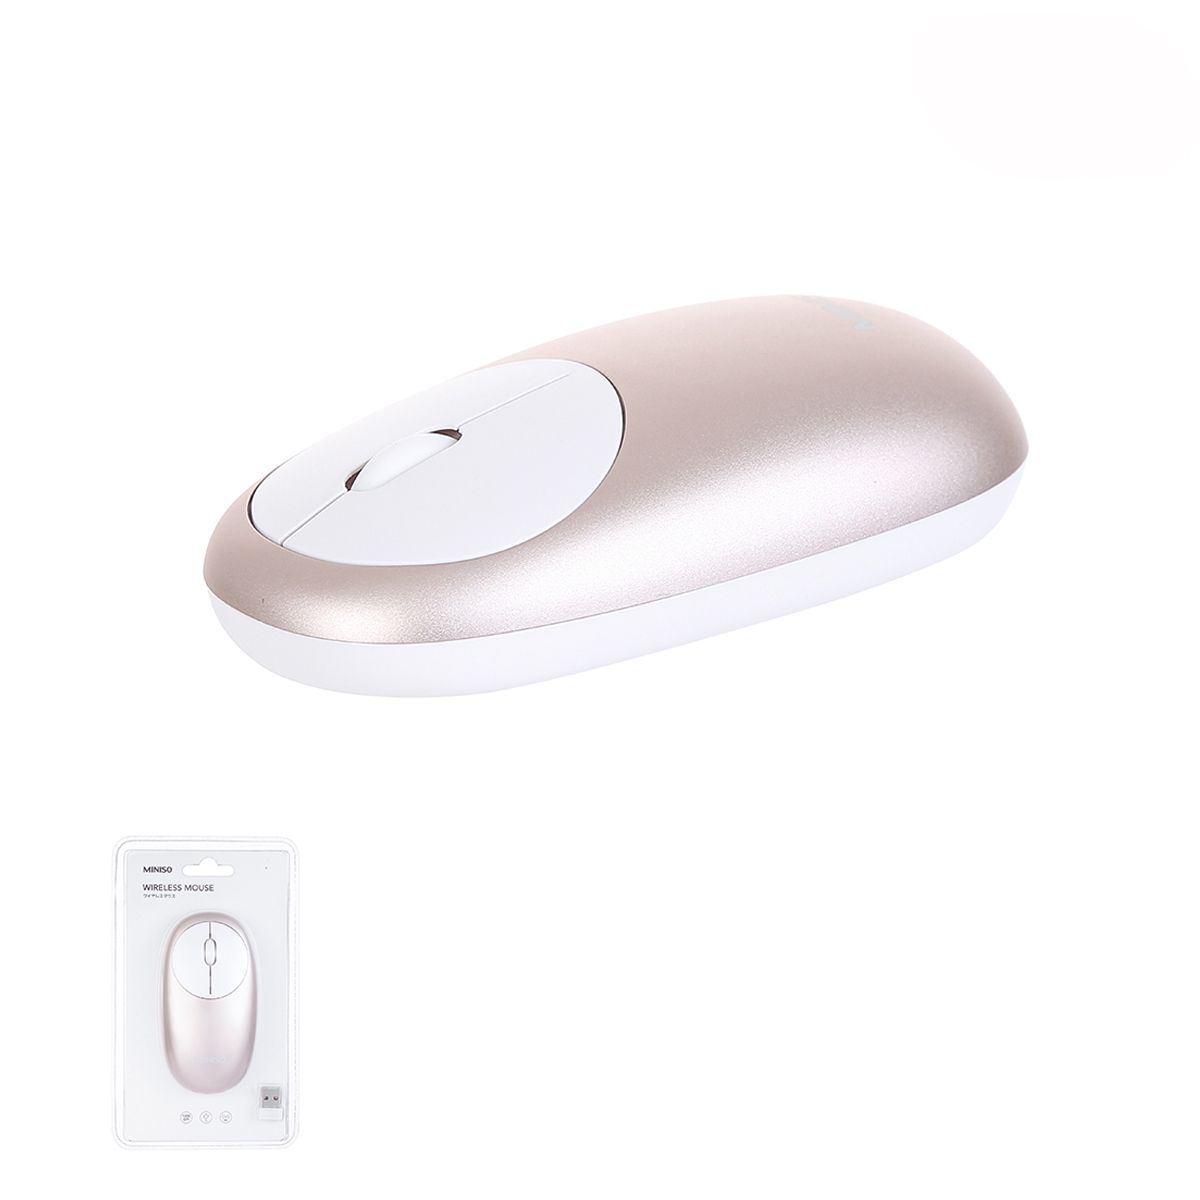 MINISO-WM-106-Rose-Gold-1200DPI--Ultrathin-Wireless-Metal-Mouse-for-PC-Oiffice-Laptop-1600671